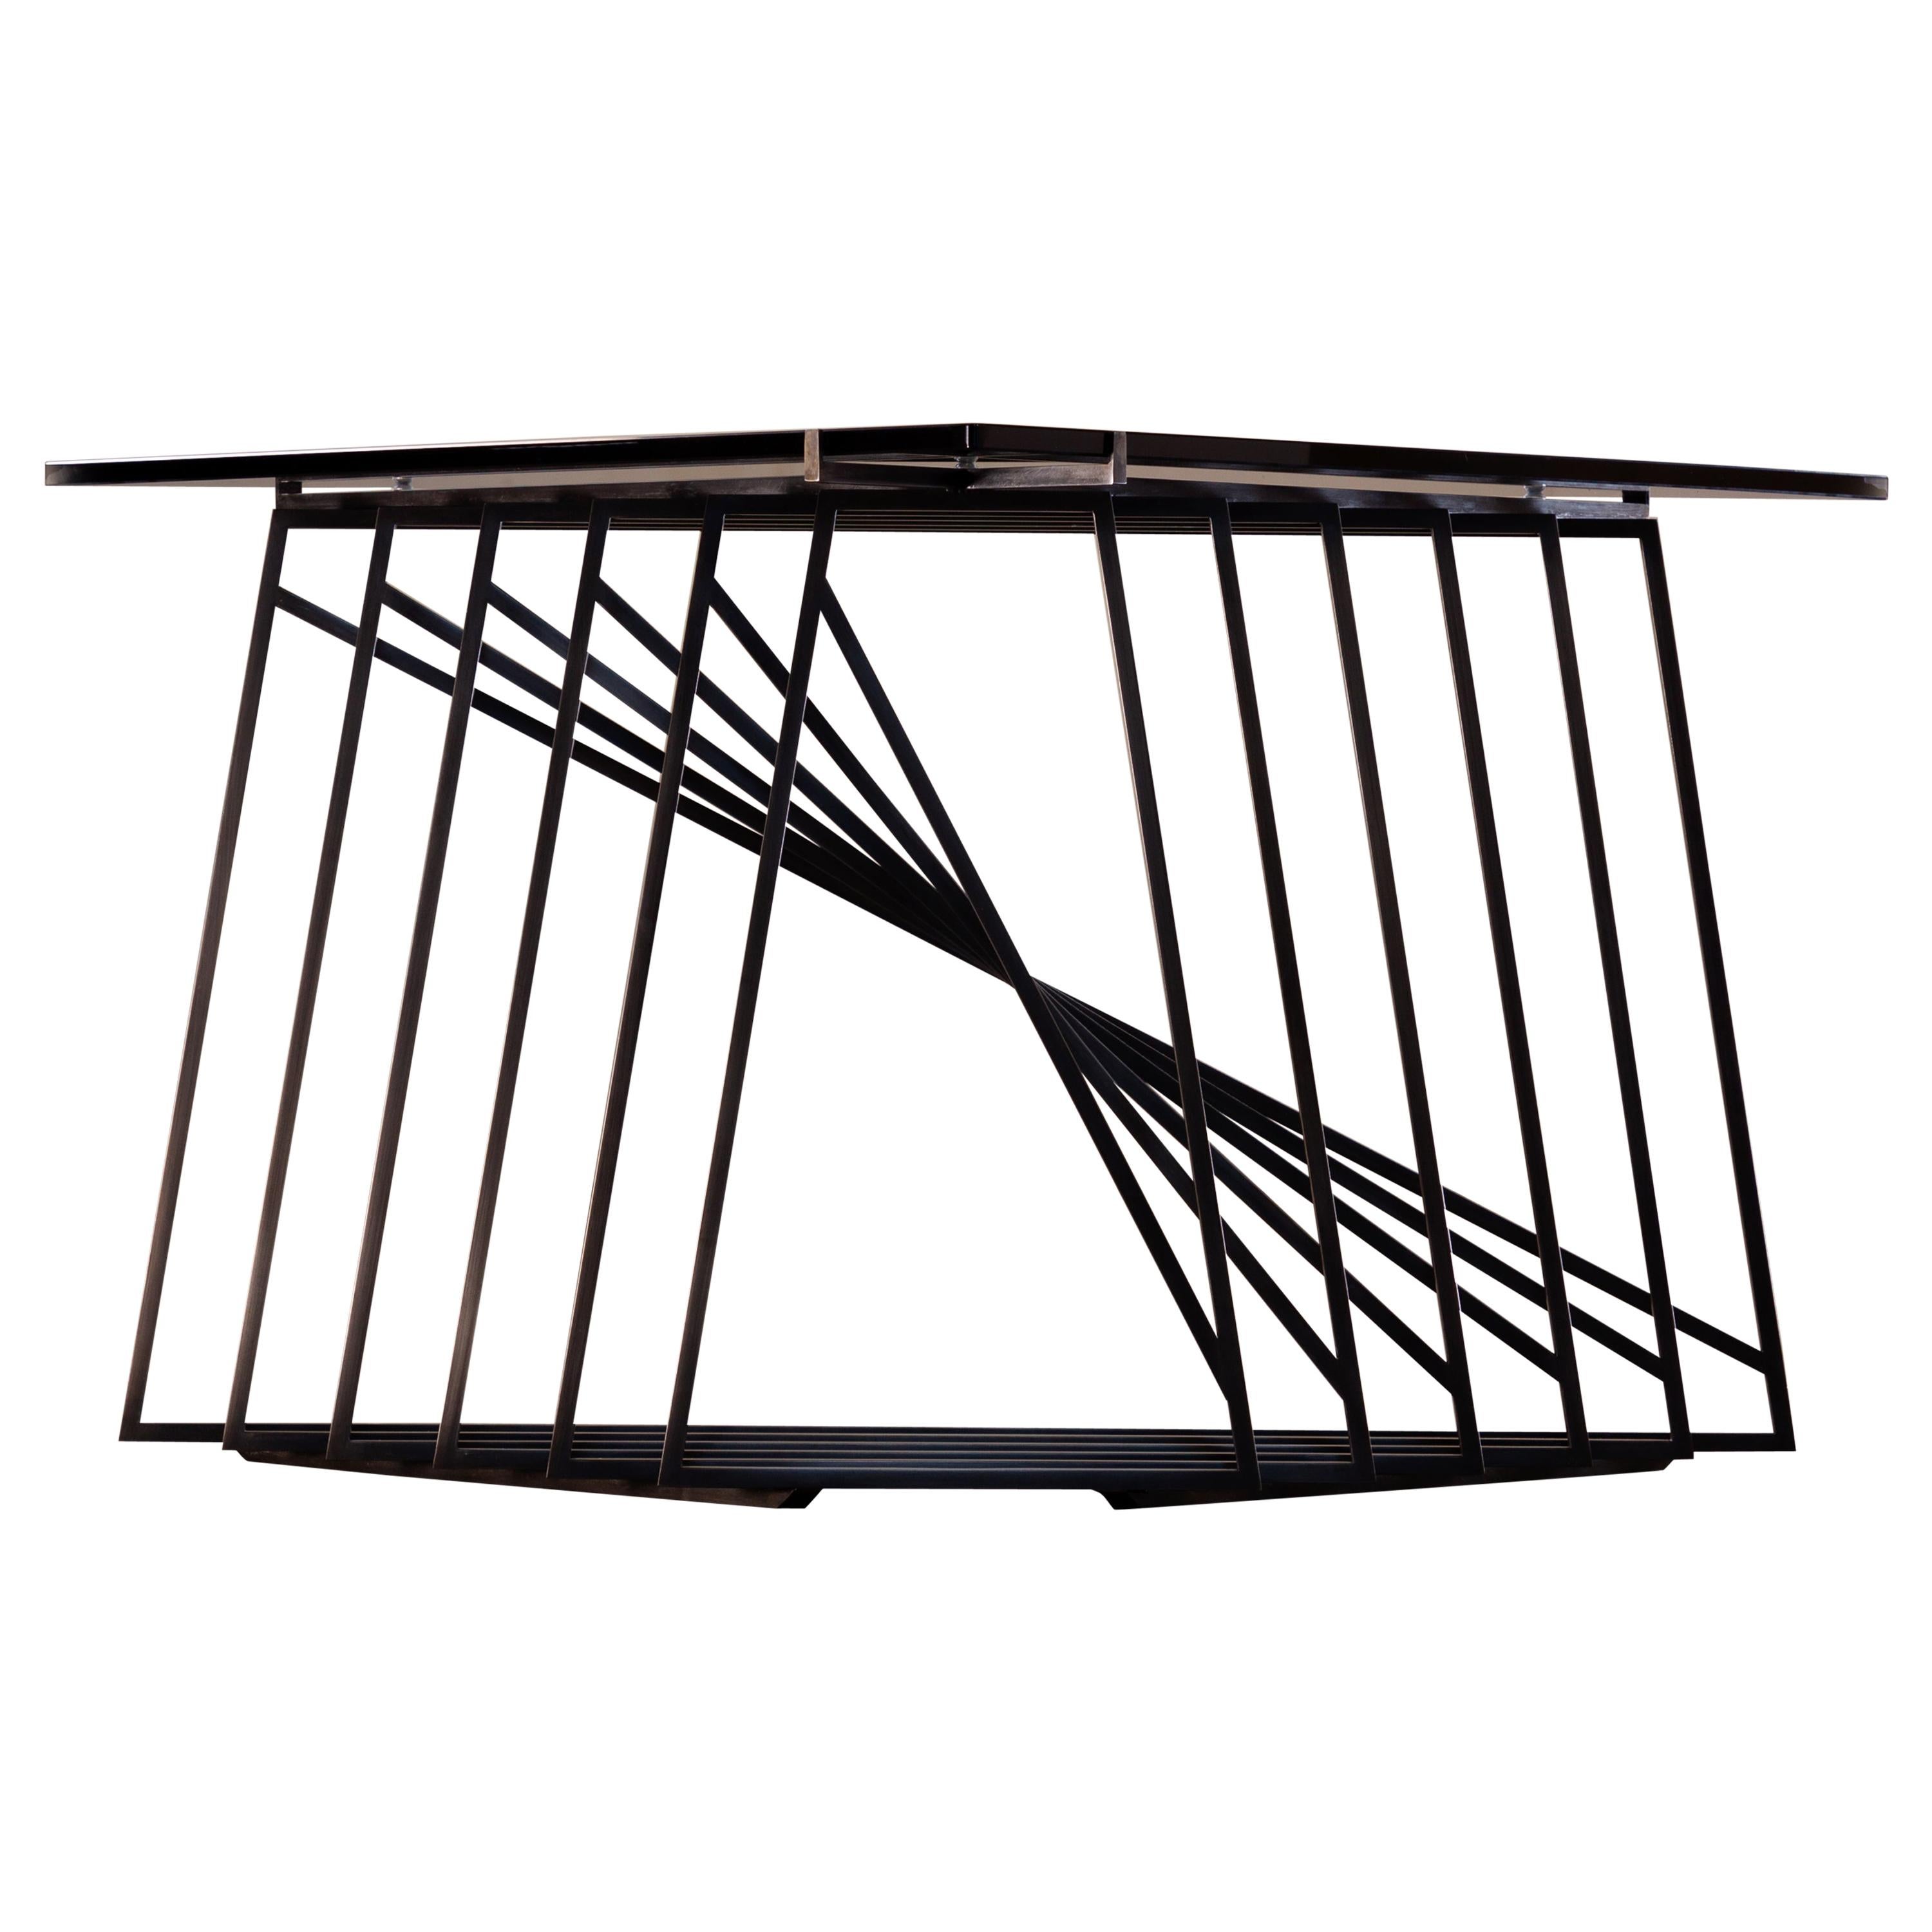 Nexus Side Table in Blackened Steel and Smoked Glass by Force/Collide